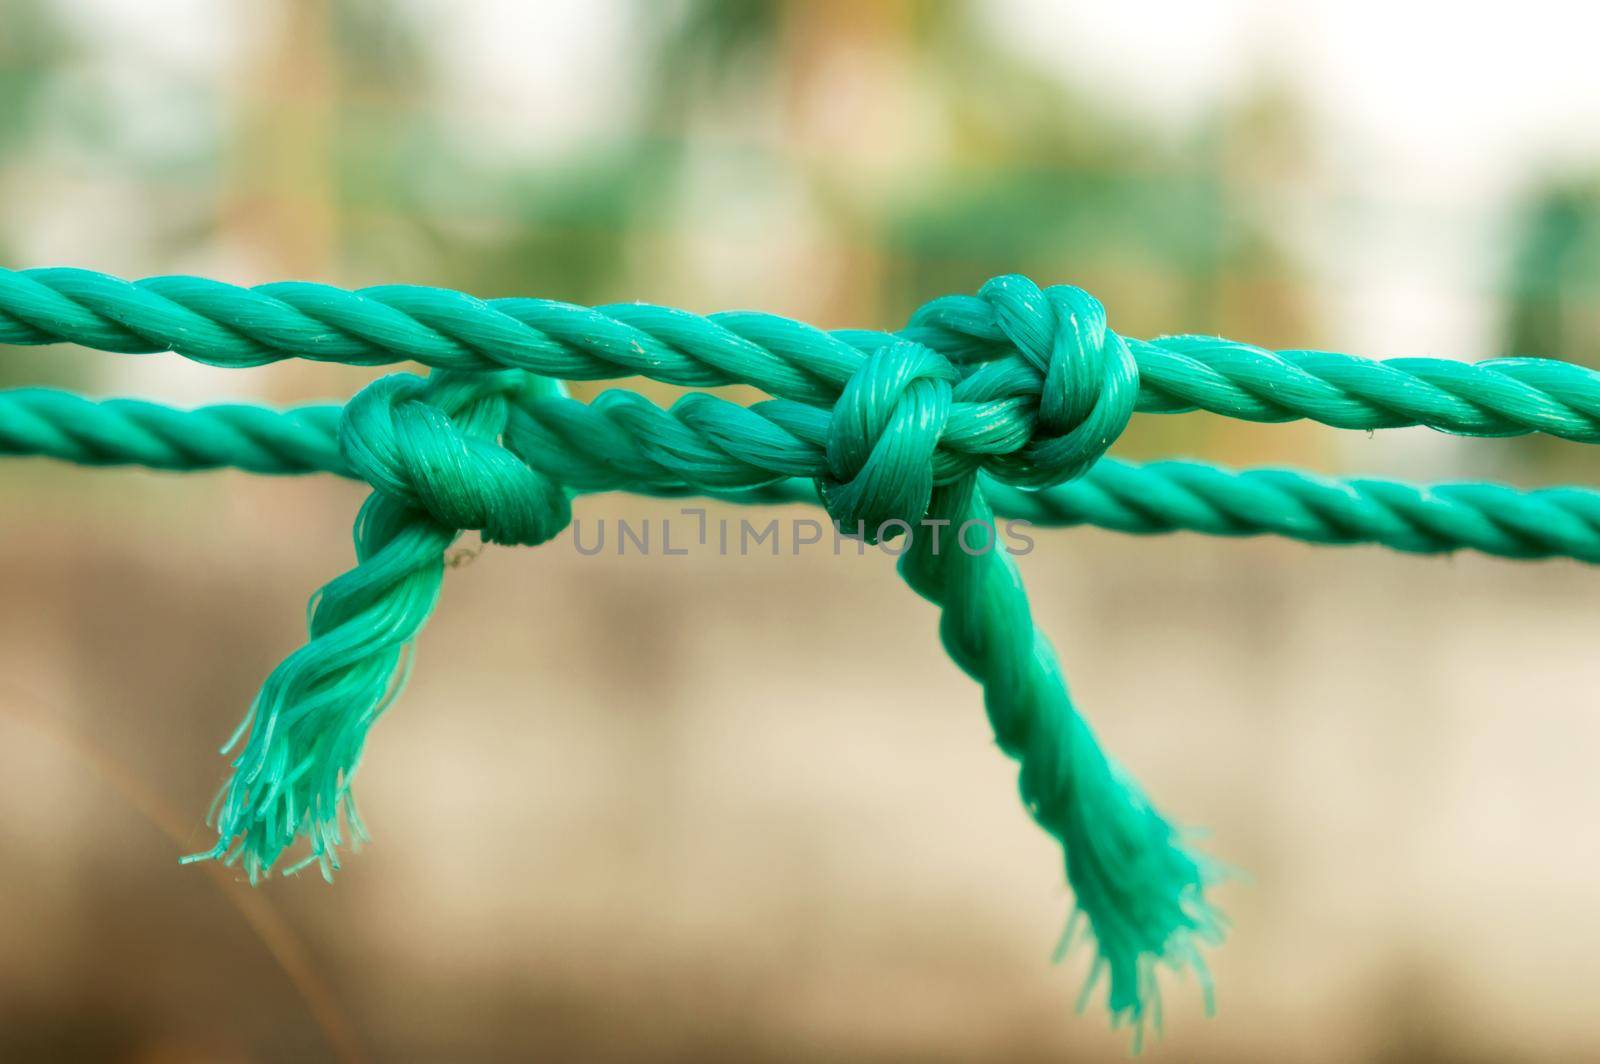 Rope tie knot Closeup. Rope with a two tied knot in the middle isolated from background. A symbol of trust, strength, safety support faith and togetherness concept. Illustrative conceptual photography by sudiptabhowmick